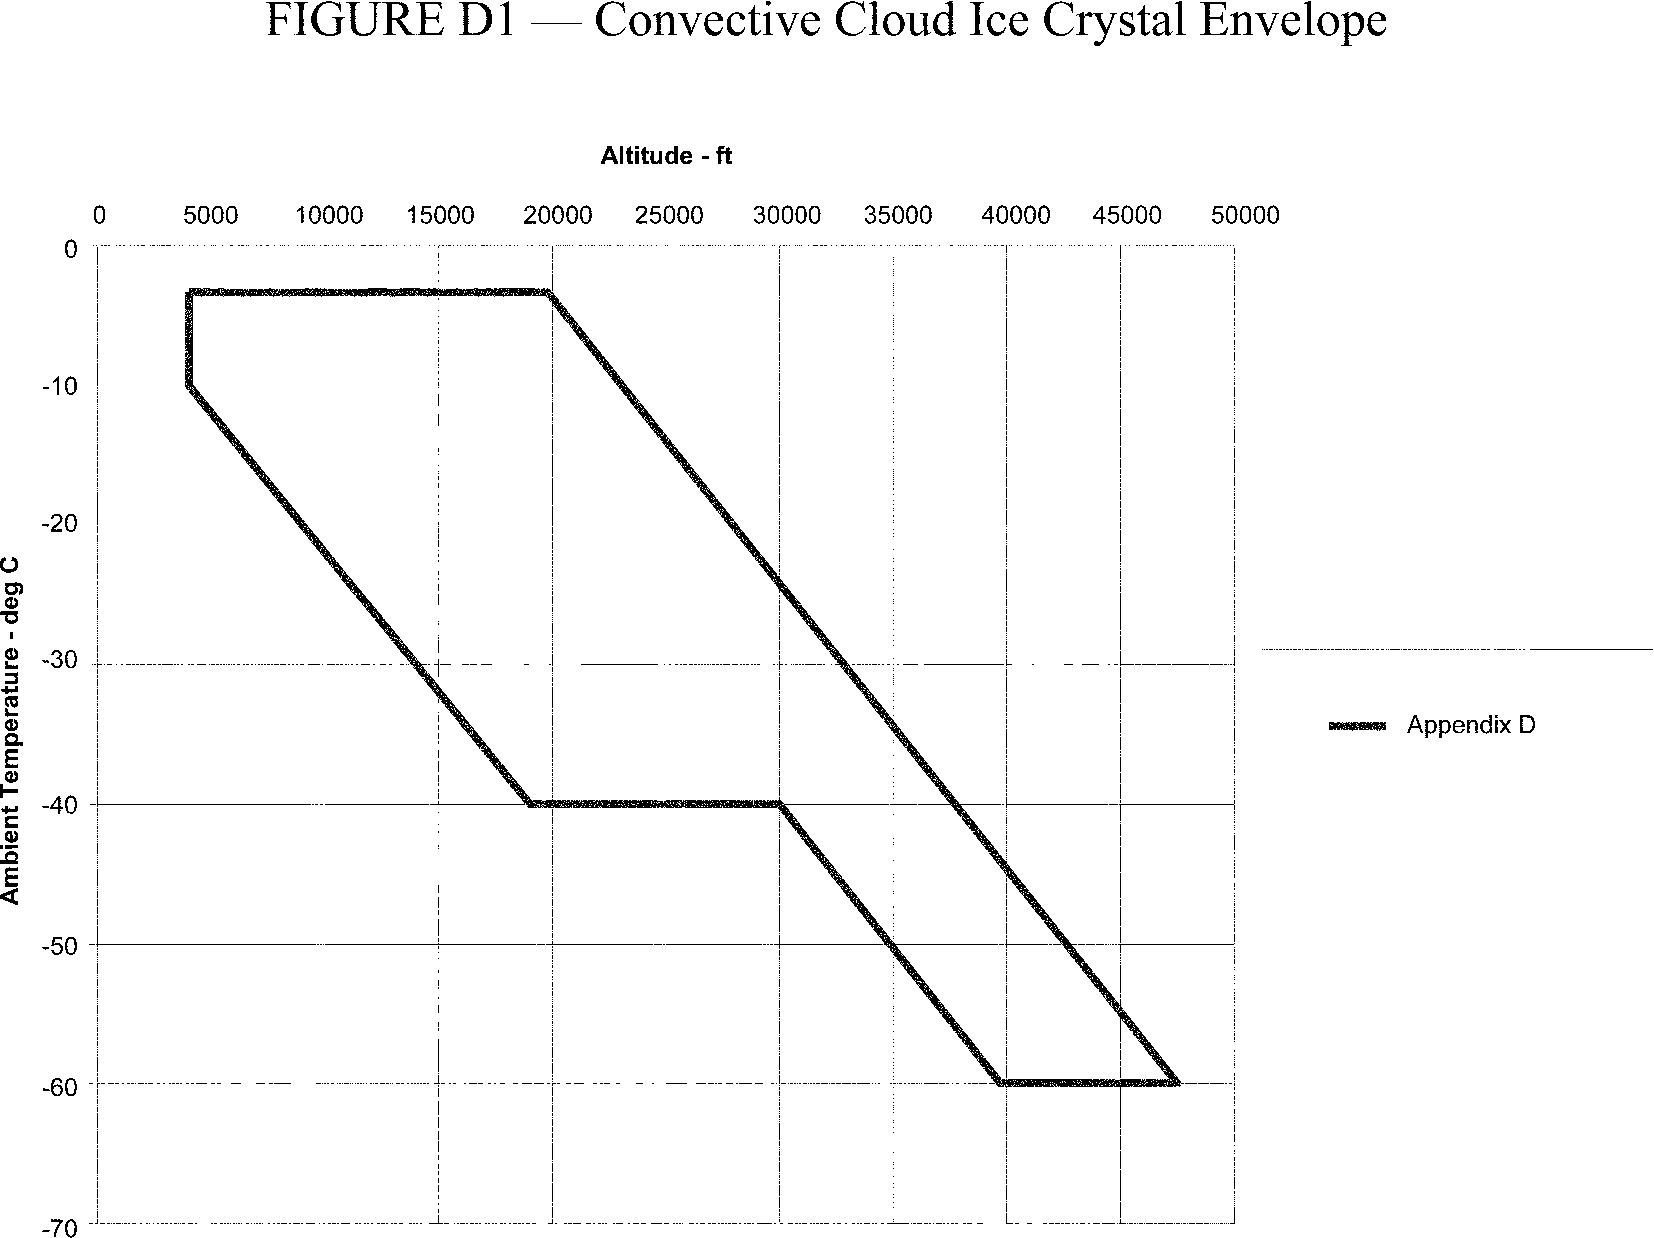 Graphic of The ice crystal icing envelope is depicted in Figure D1 of this Appendix.